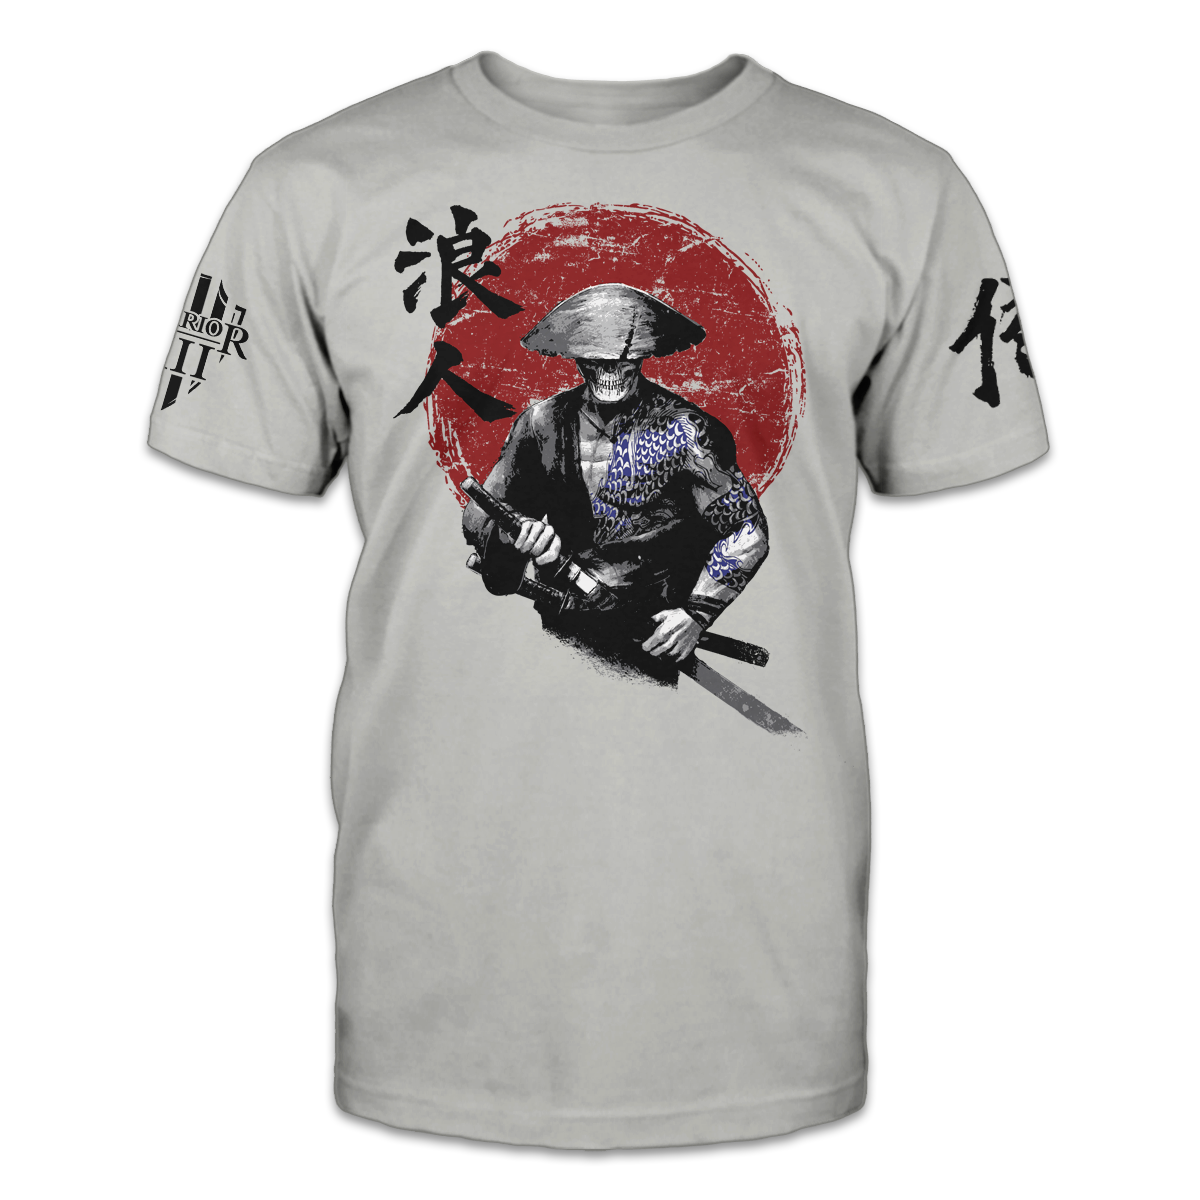 A light grey t-shirt that pays tribute to the lord-less samurai. It features Japanese lettering for "Ronin" along with a samurai warrior printed on the front of the shirt.